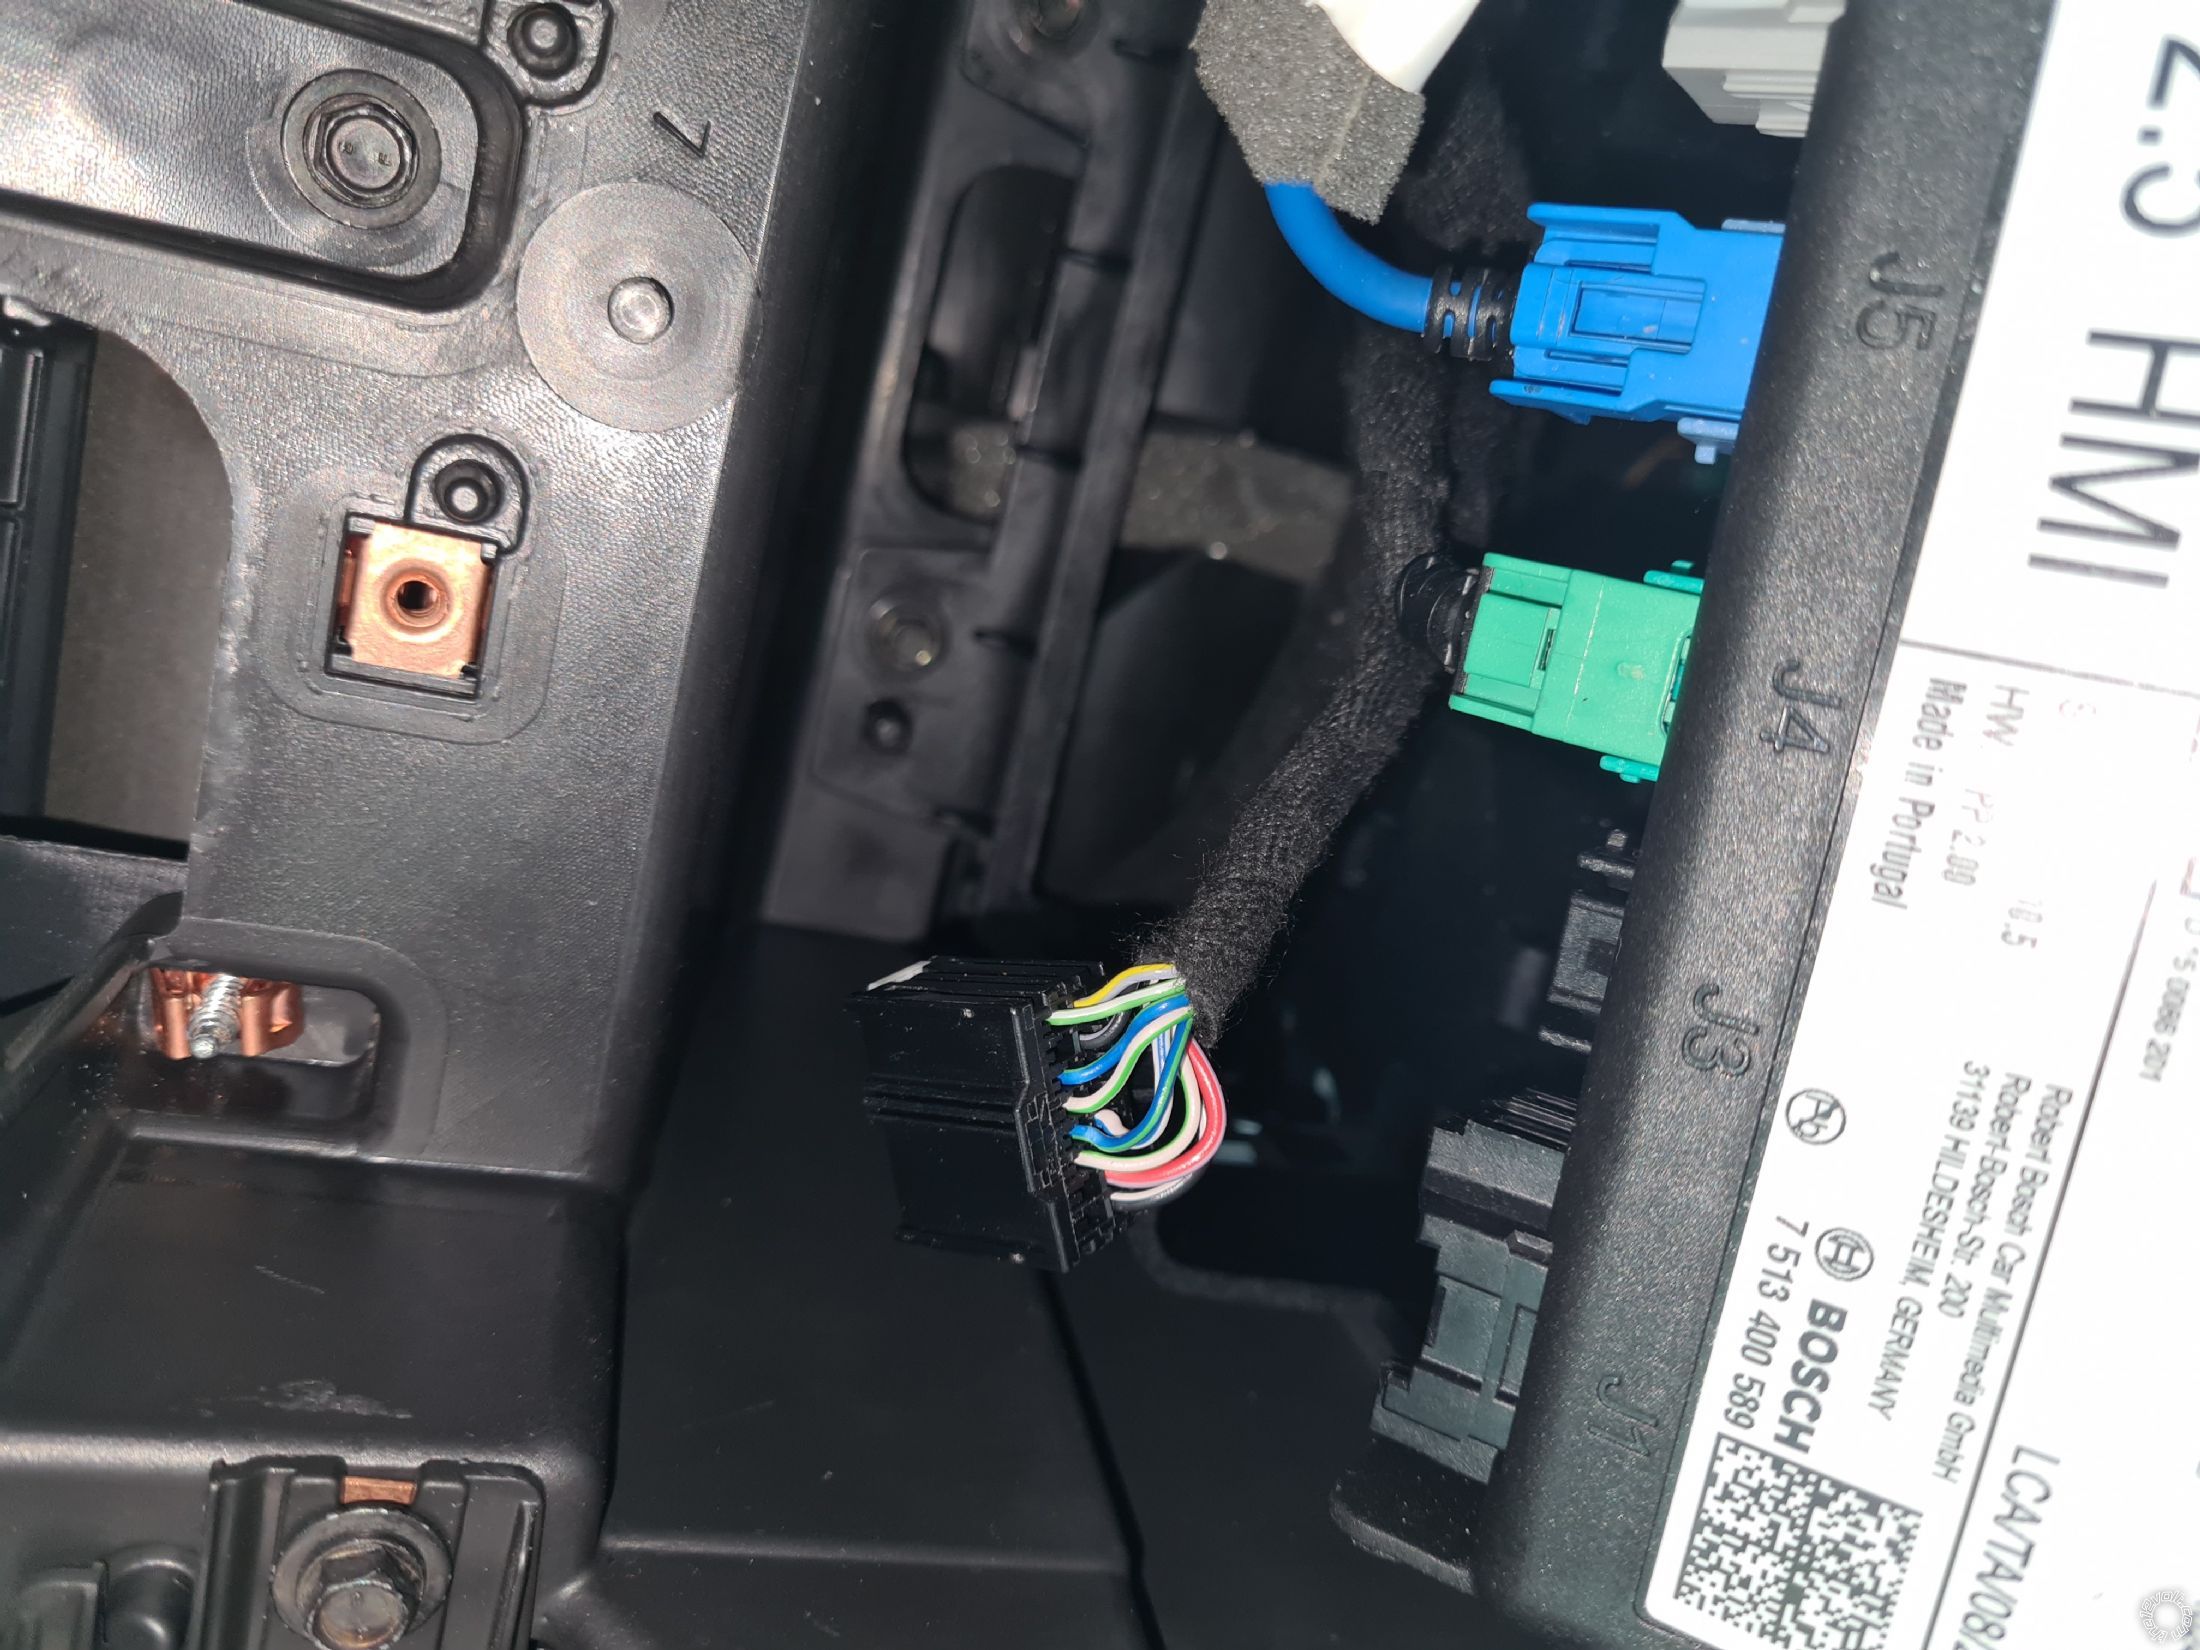 2018 Opel Mokka X Stereo Wiring - Last Post -- posted image.